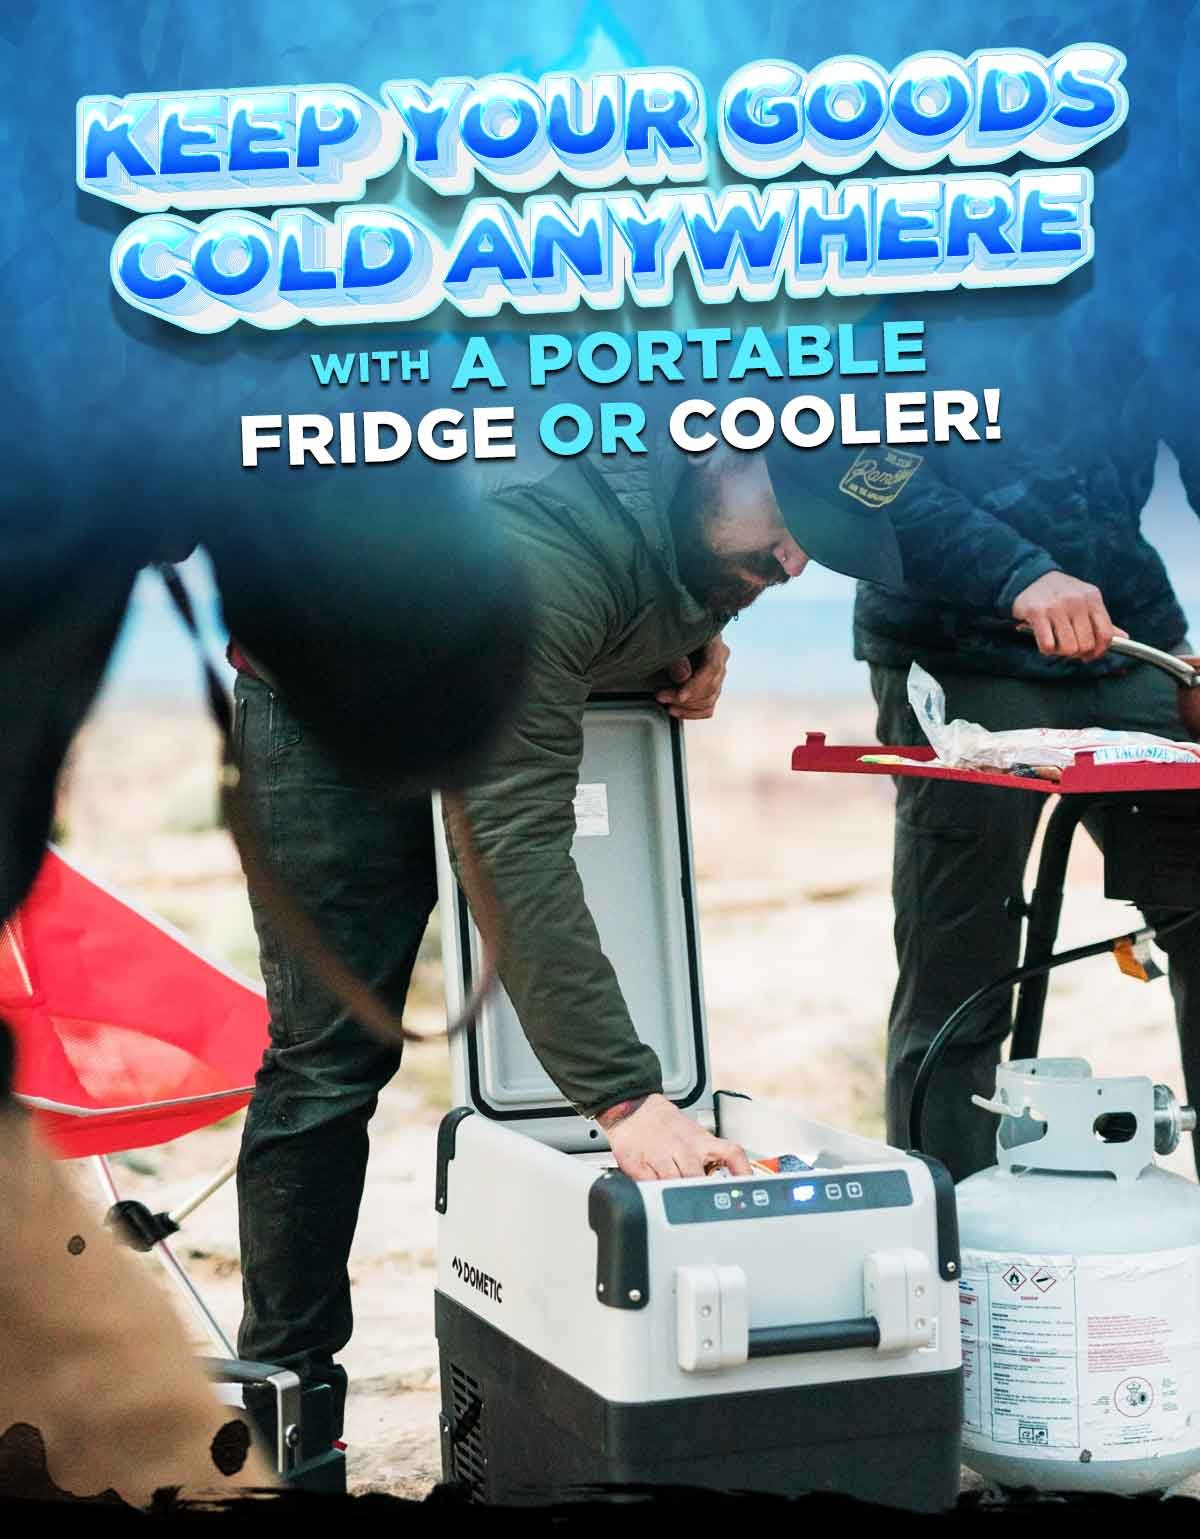 Keep Your Goods Cold Anywhere With A Portable Fridge Or Cooler!